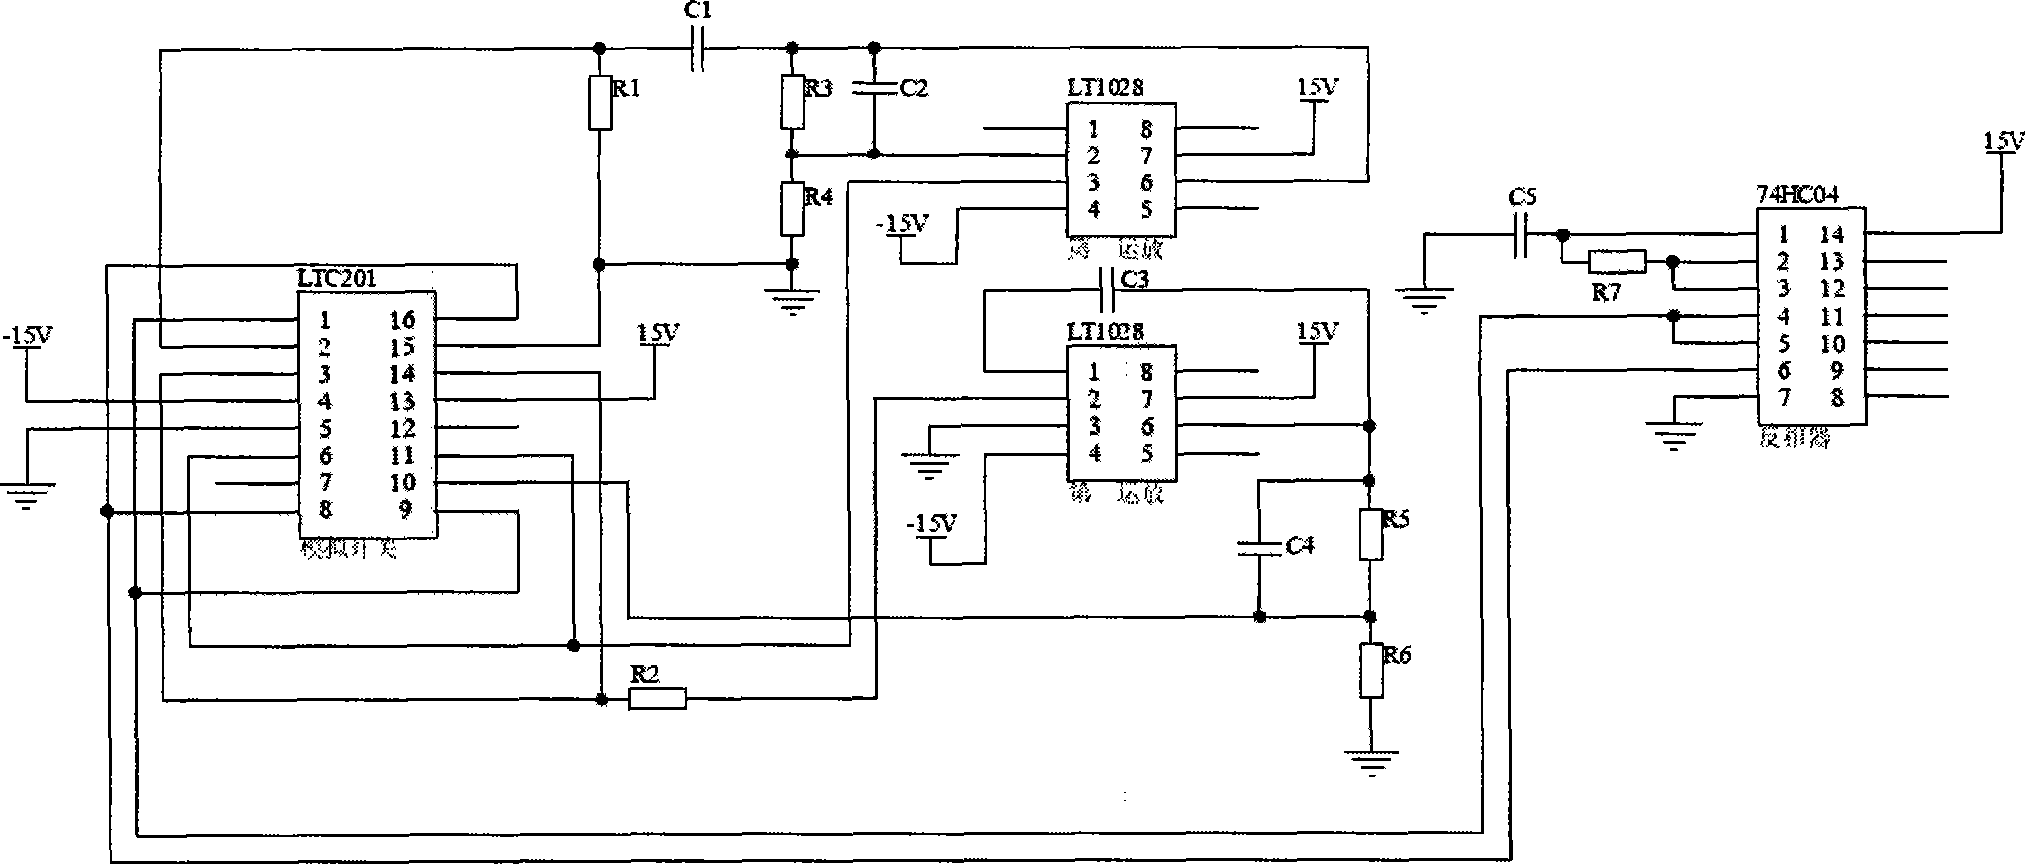 Signal conditioning circuit for high precision measuring uV level voltage